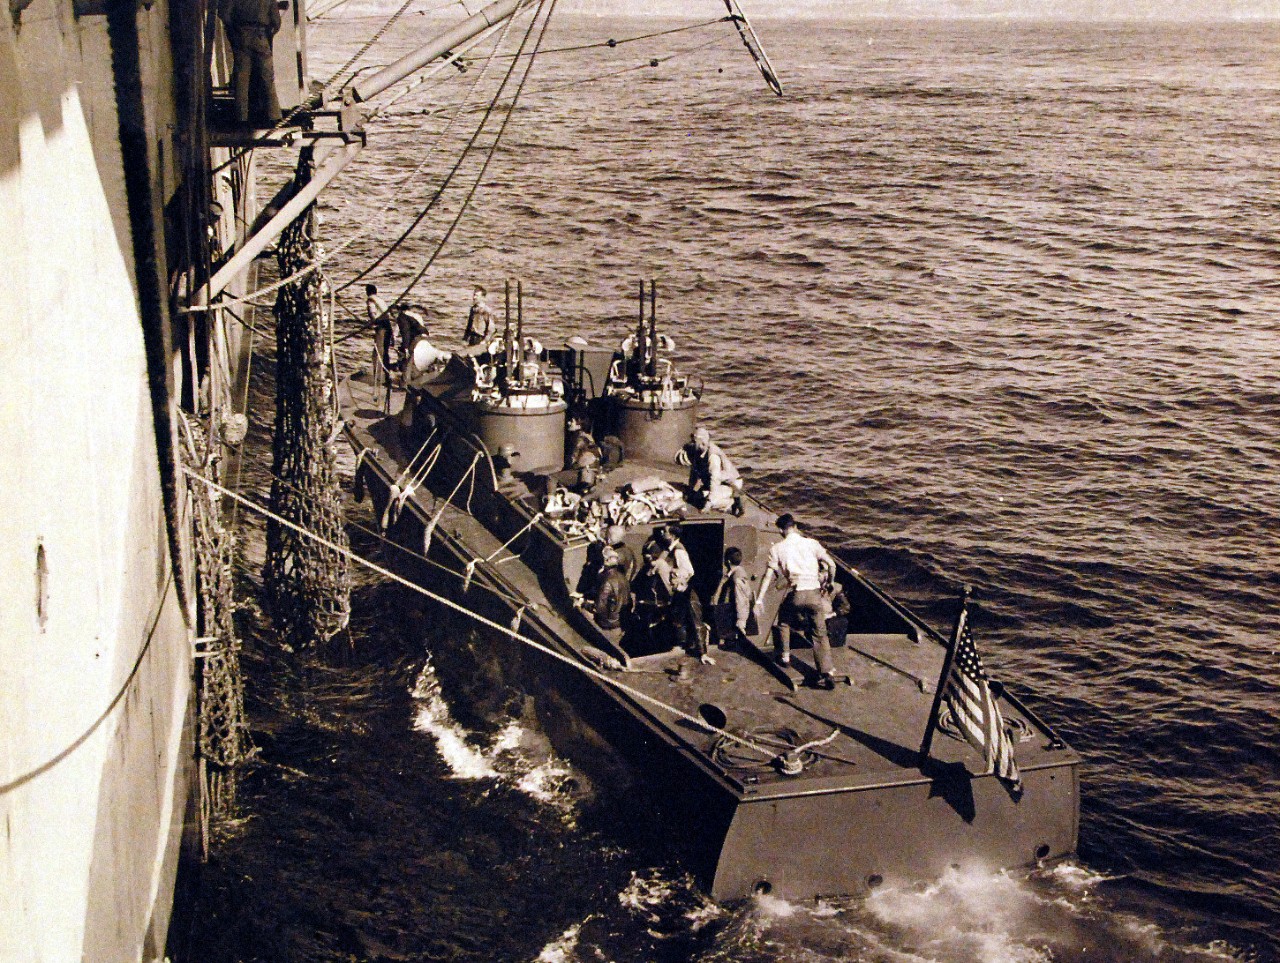 <p>80-G-30612: Operation Torch, November 1942. Crash boat brings aviators to troop ship from Safi, Morocco, during the operation. Photograph released November 12, 1942.&nbsp;</p>
